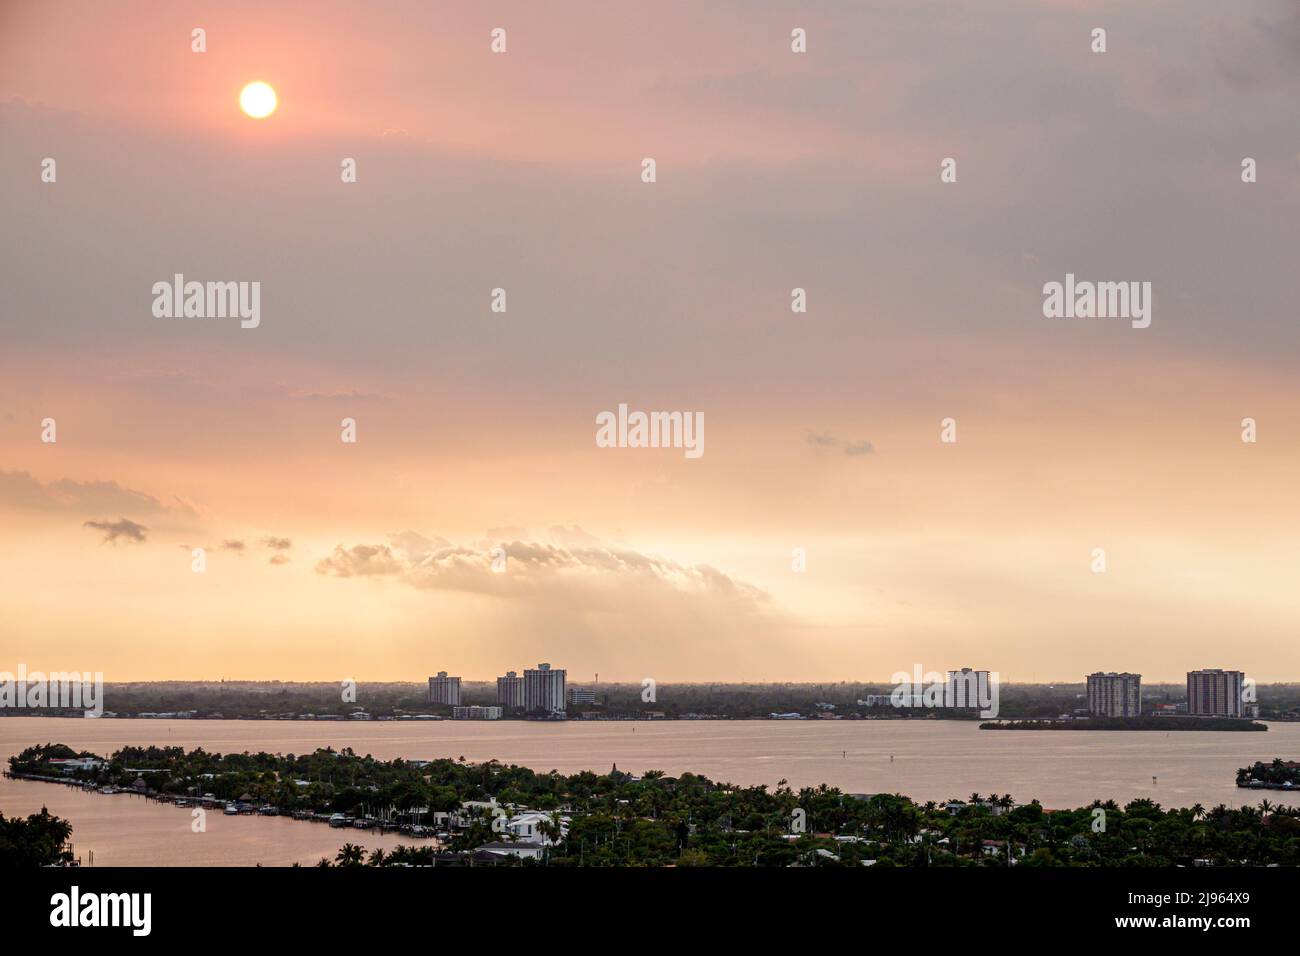 Miami Beach Florida,Biscayne Point Bay water smoke from Everglades fire,global warming climate crisis change sun sky Stock Photo